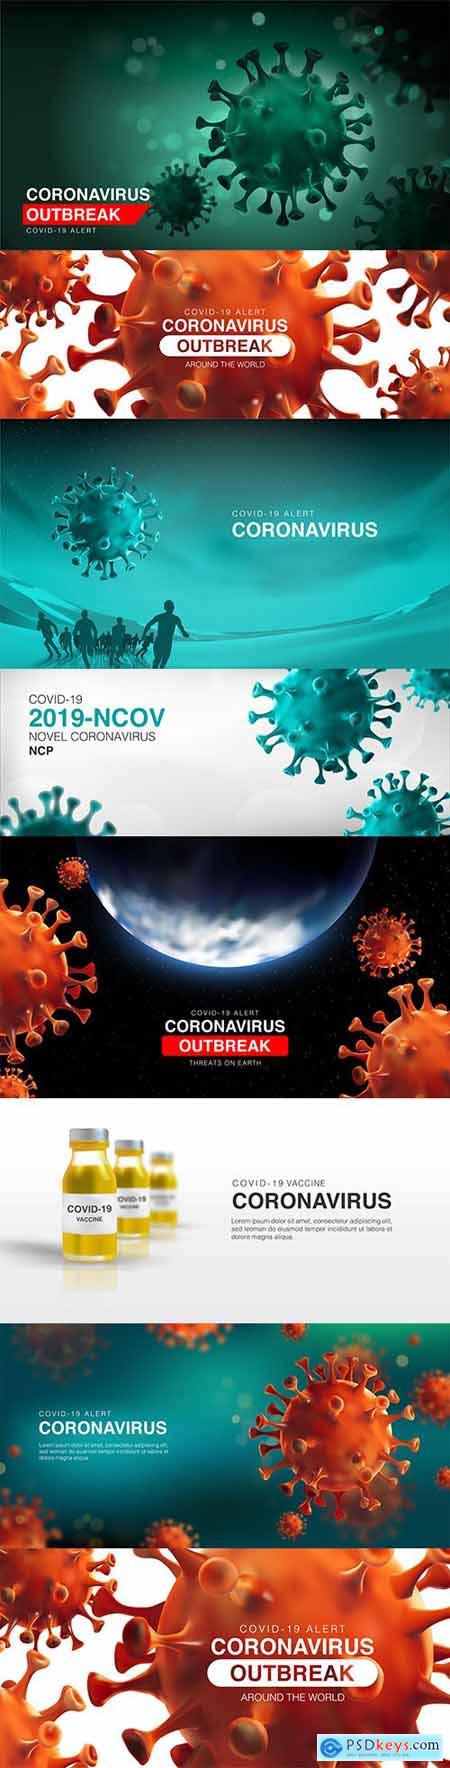 Realistic 3d illustrations vaccine for cell coroniviruses